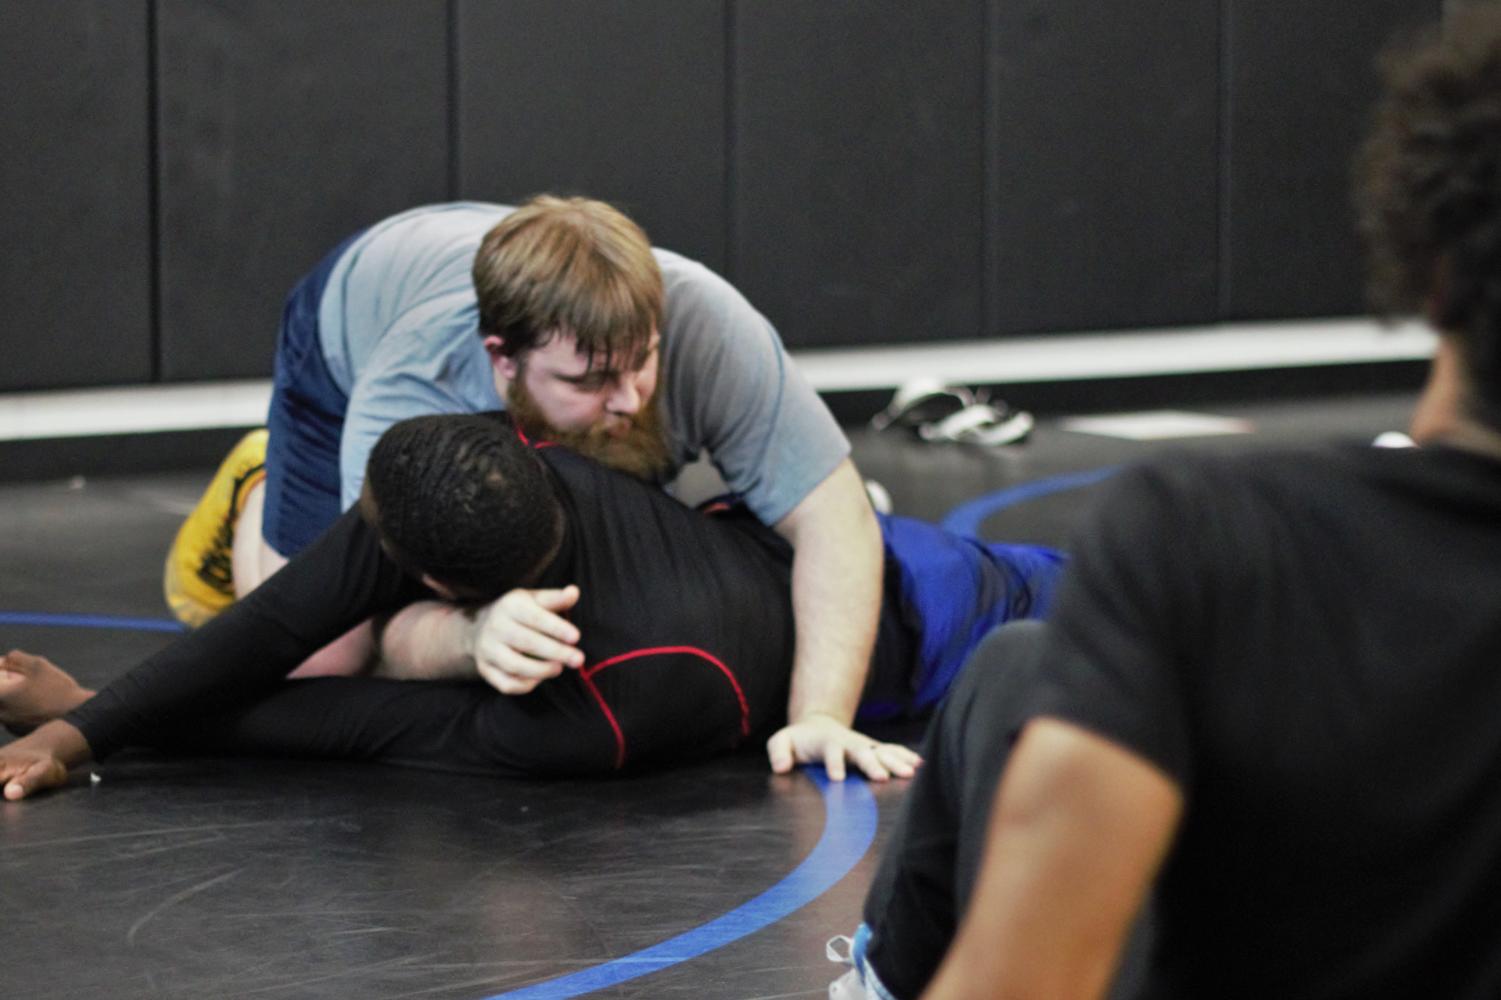 
Head wrestling coach Jacob Green performs a takedown on a student for demonstration. Practice and drills take place in the new mat room in the Hawk Arena.
